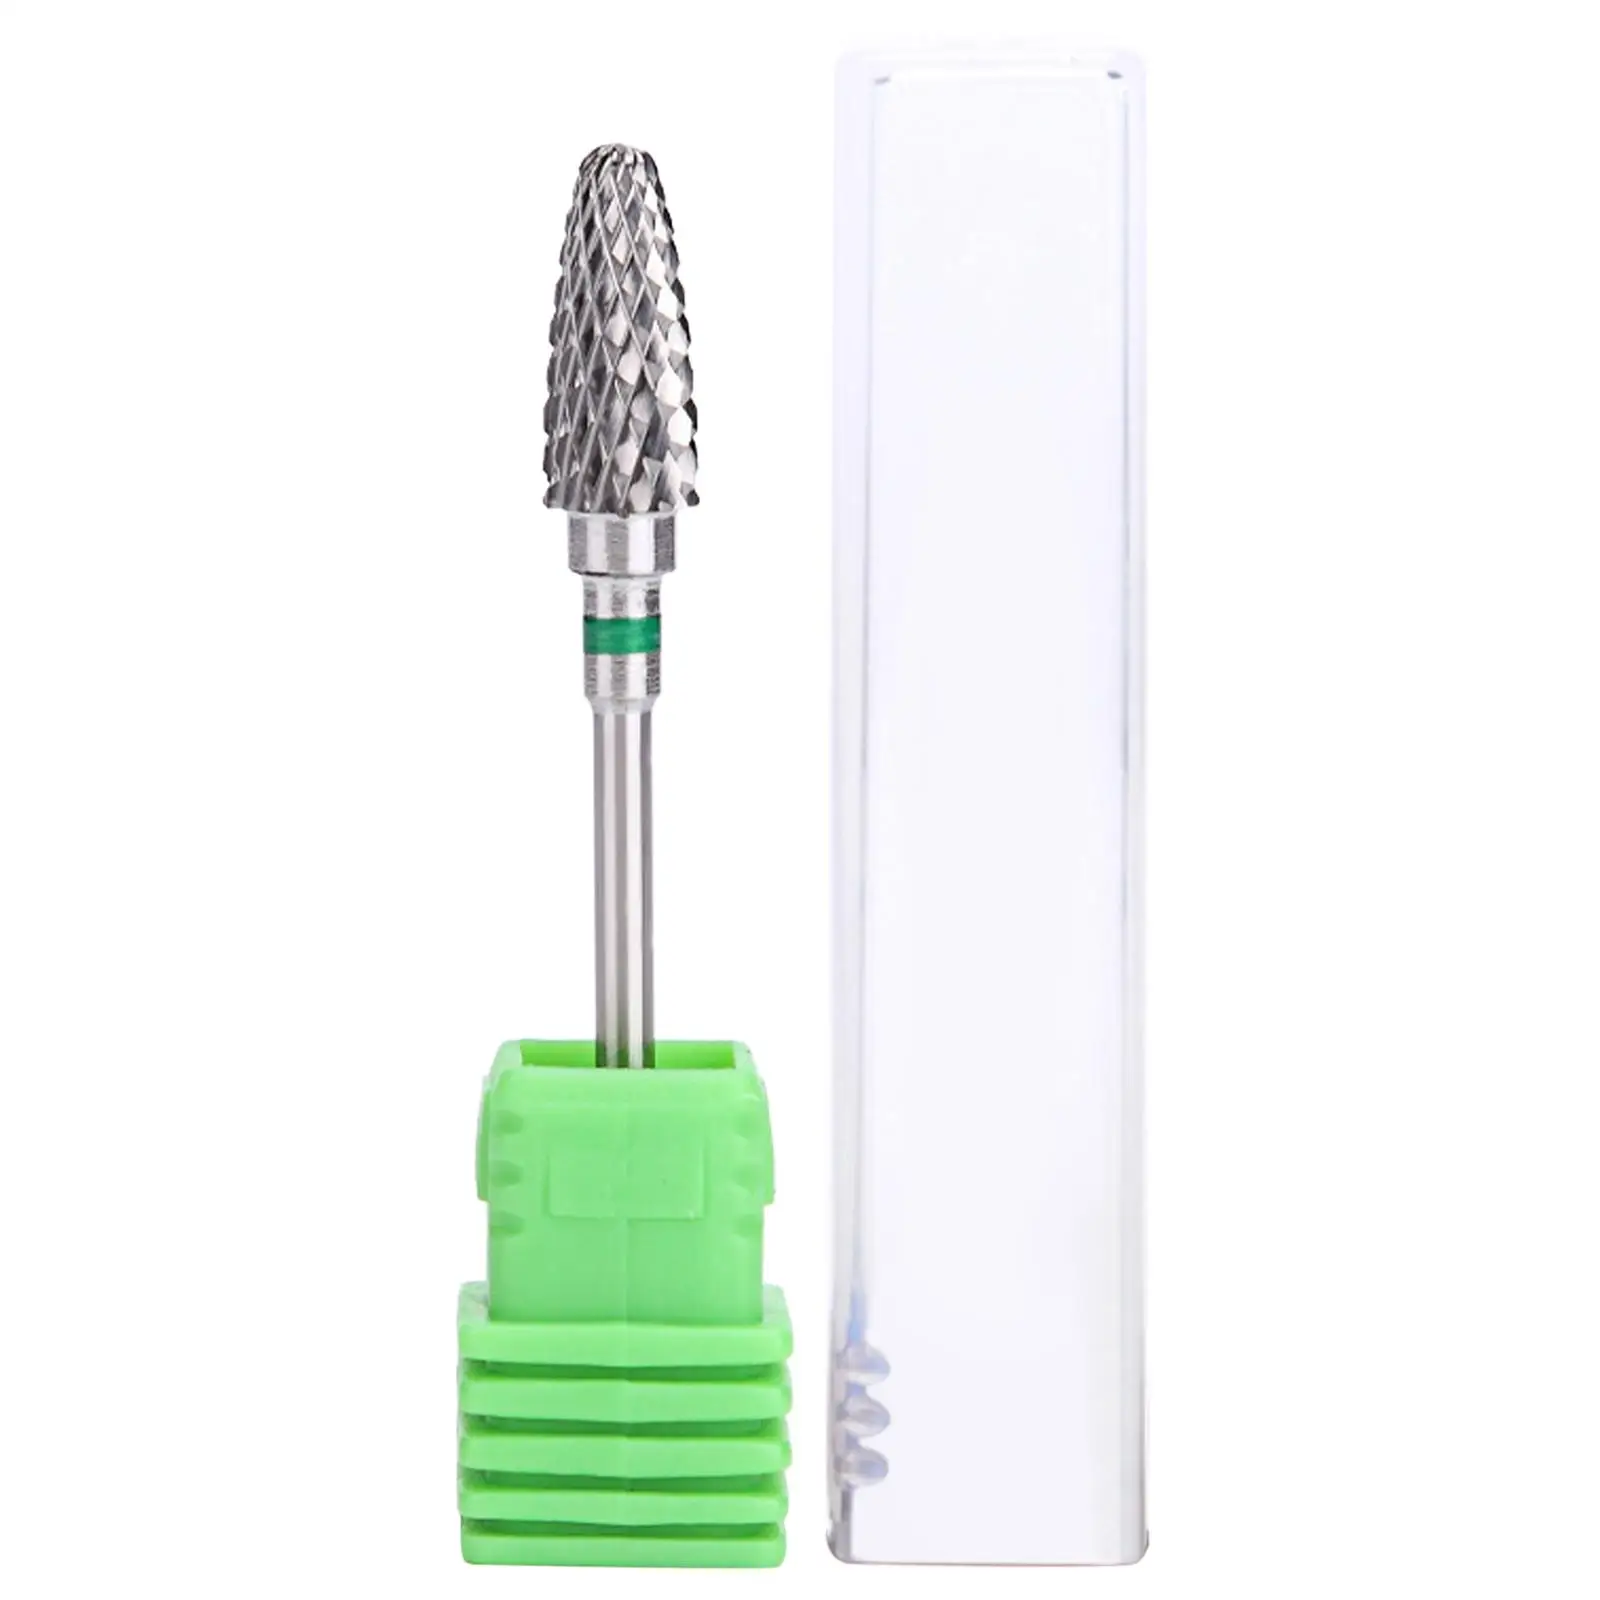 Rotary Nail Drill Bit Manicure Grinding Head for Metal, Stone, Ceramic Tiles Easy to Use Replacement Practical Widely Use Sturdy